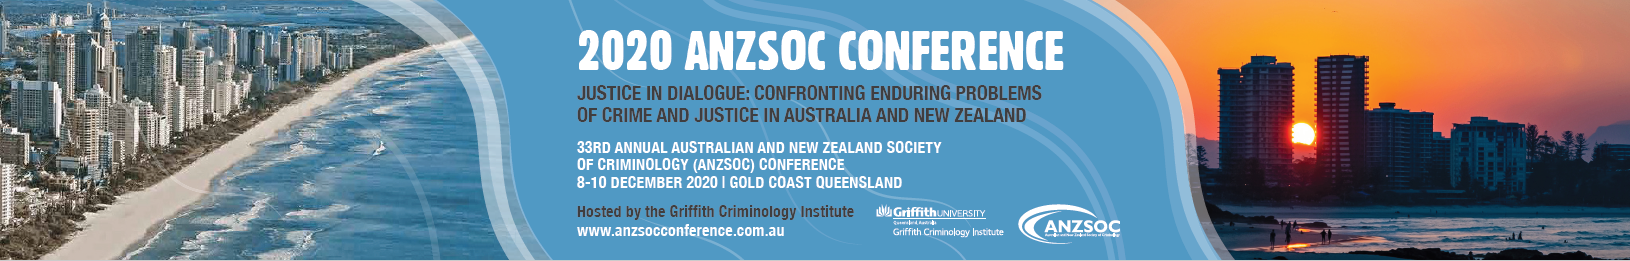 2020 ANZSOC Conference